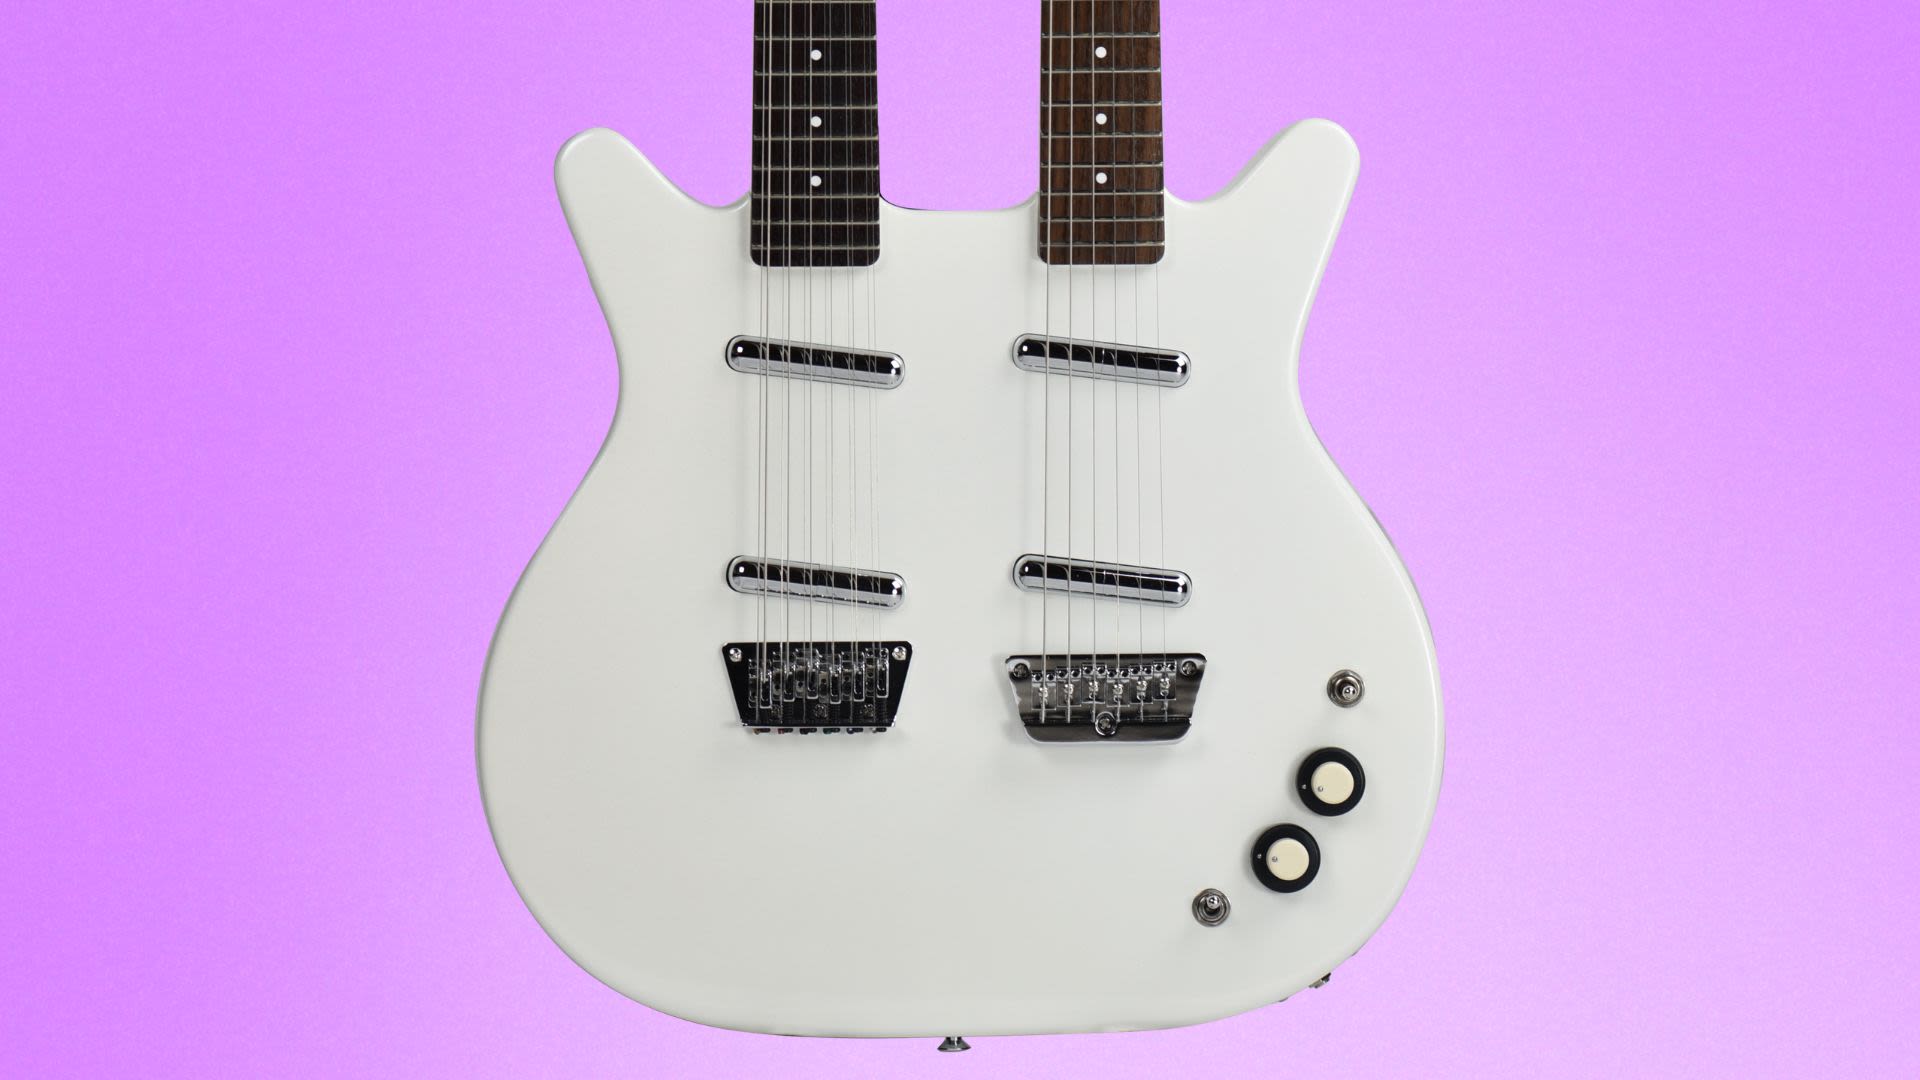 Can’t afford the Jimmy Page double-neck? Danelectro has you covered with an $899 alternative